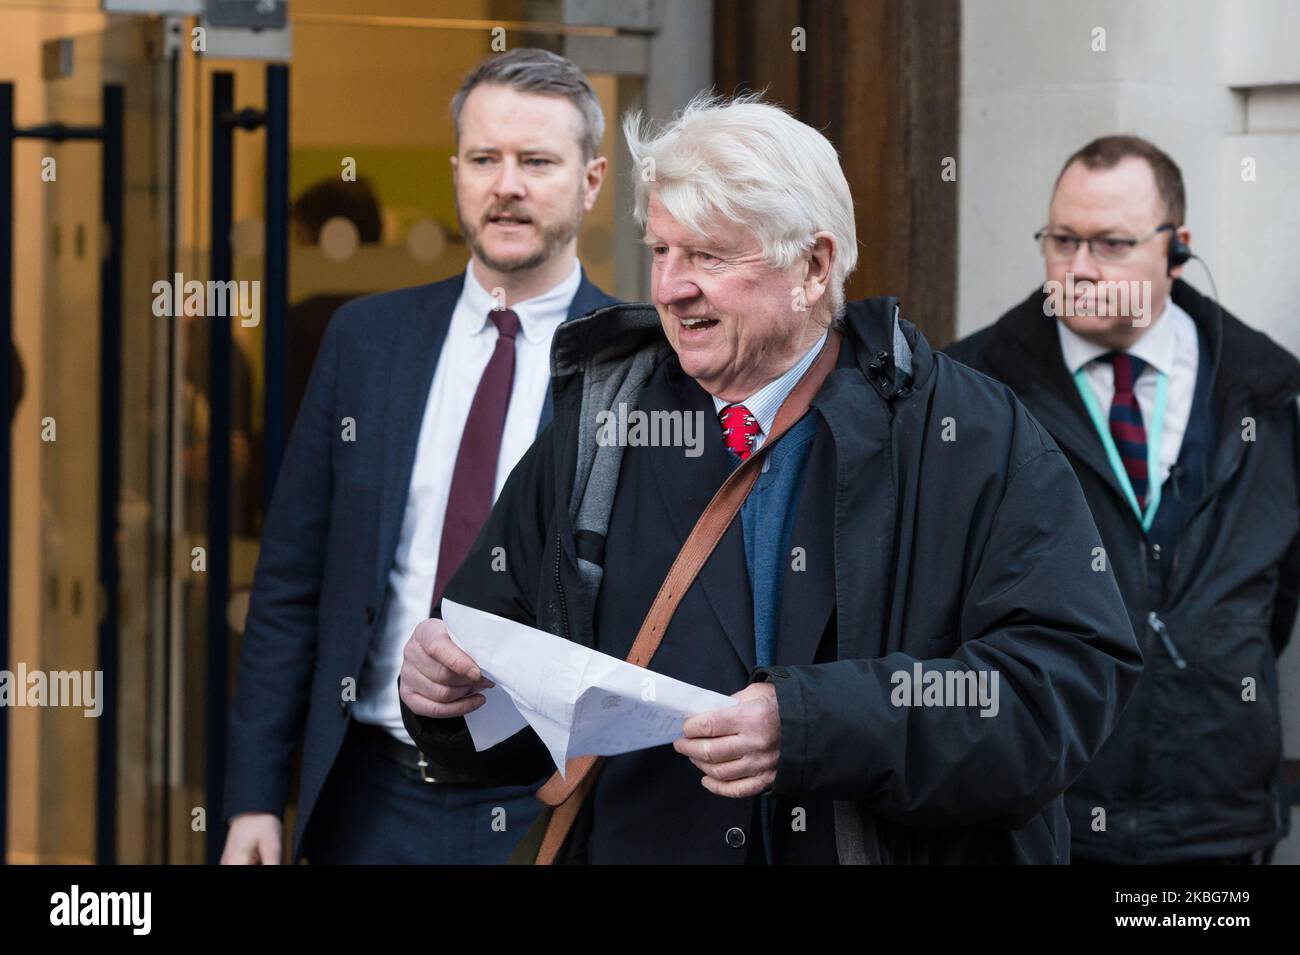 Stanley Johnson arrives at Science Museum where Britain's Prime Minister Boris Johnson launches the UK’s COP26 strategy ahead of the Glasgow Summit in November on 04 February, 2020 in London, England. Prime Minister Boris Johnson, joined by Italy's Prime Minister Giuseppe Conte, naturalist Sir David Attenborough and the outgoing governor of the Bank of England, Mark Carney, is expected to call for international efforts to reach net zero carbon emissions by 2050. (Photo by WIktor Szymanowicz/NurPhoto) Foto Stock